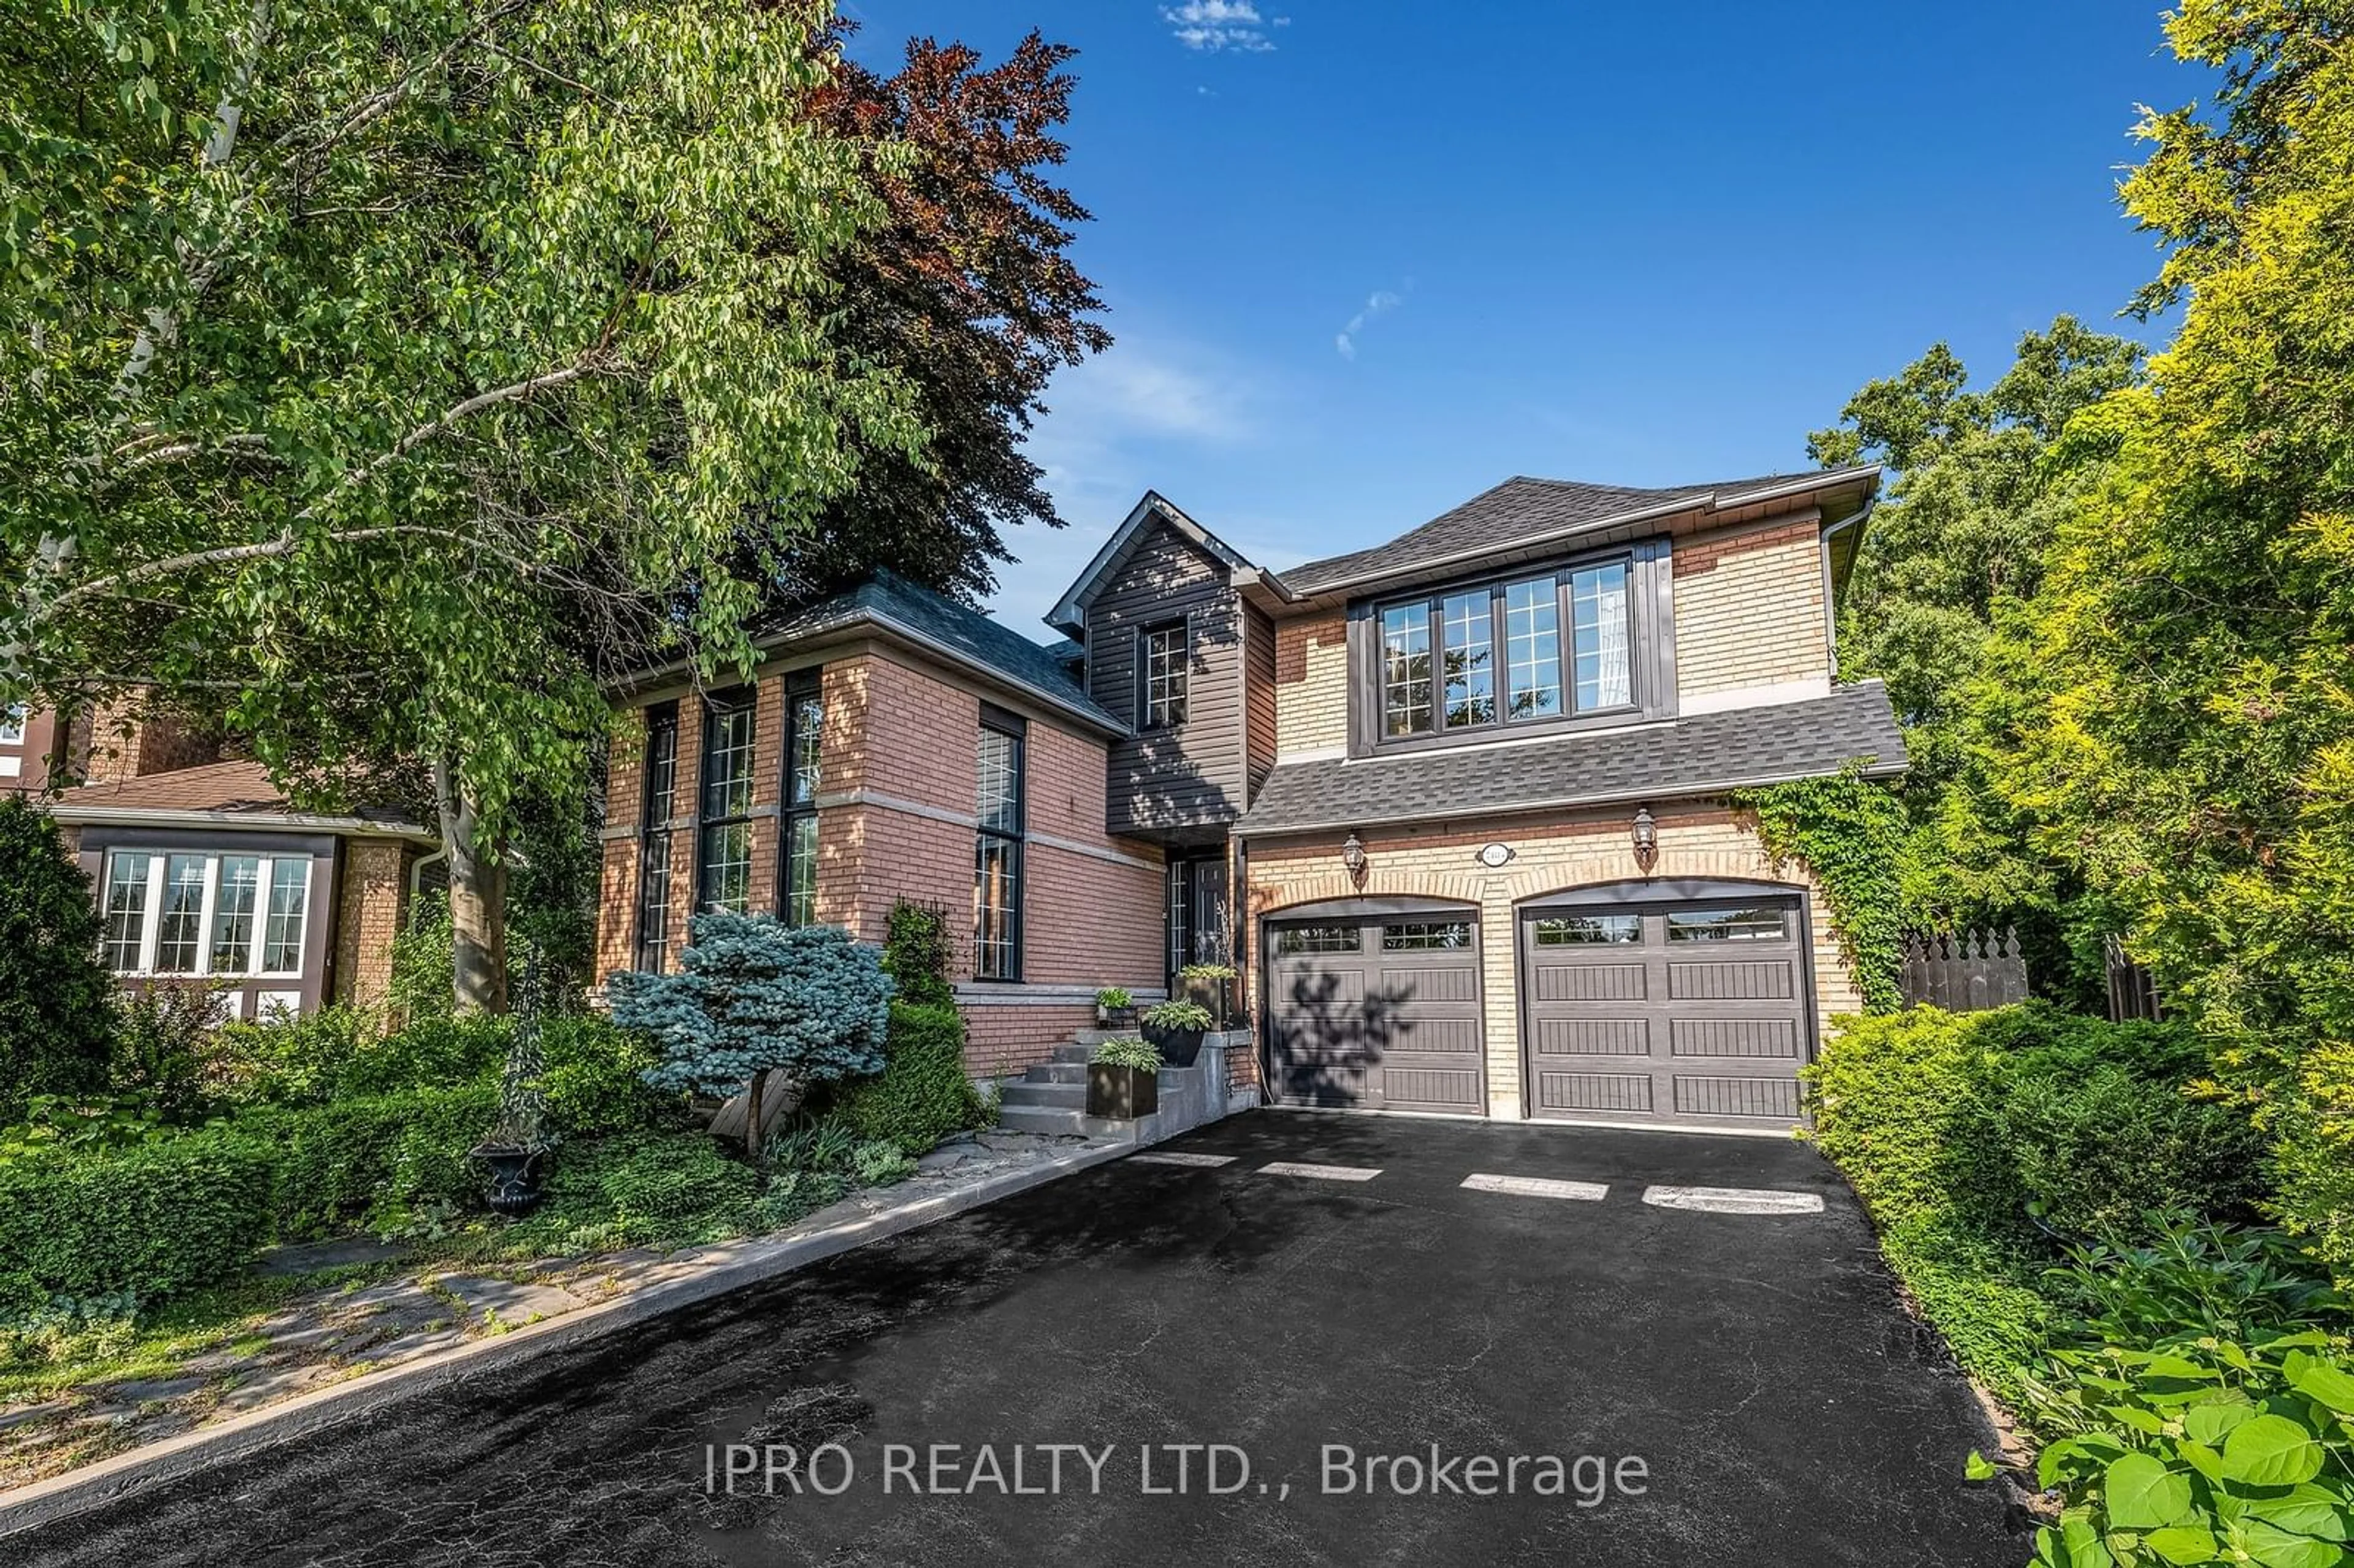 Home with brick exterior material for 7183 Windrush Crt, Mississauga Ontario L5N 6K1